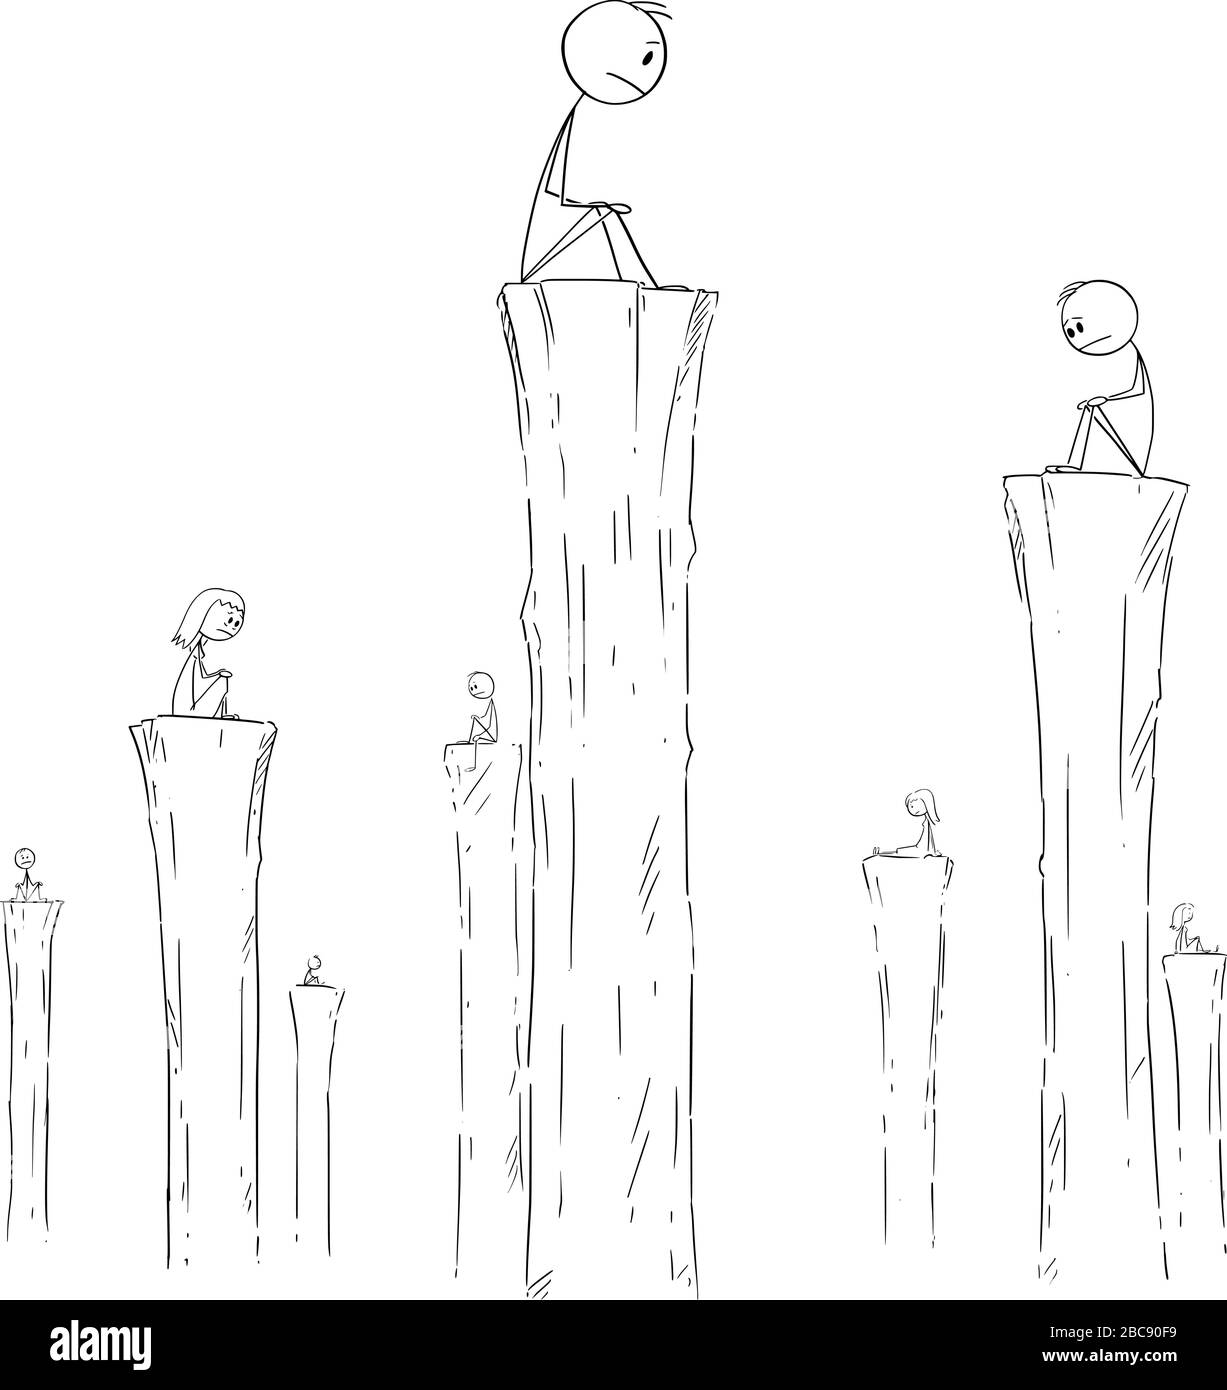 Vector cartoon stick figure drawing conceptual illustration of people sitting alone on high columns. Concept of loneliness, solitude or solitariness. Stock Vector